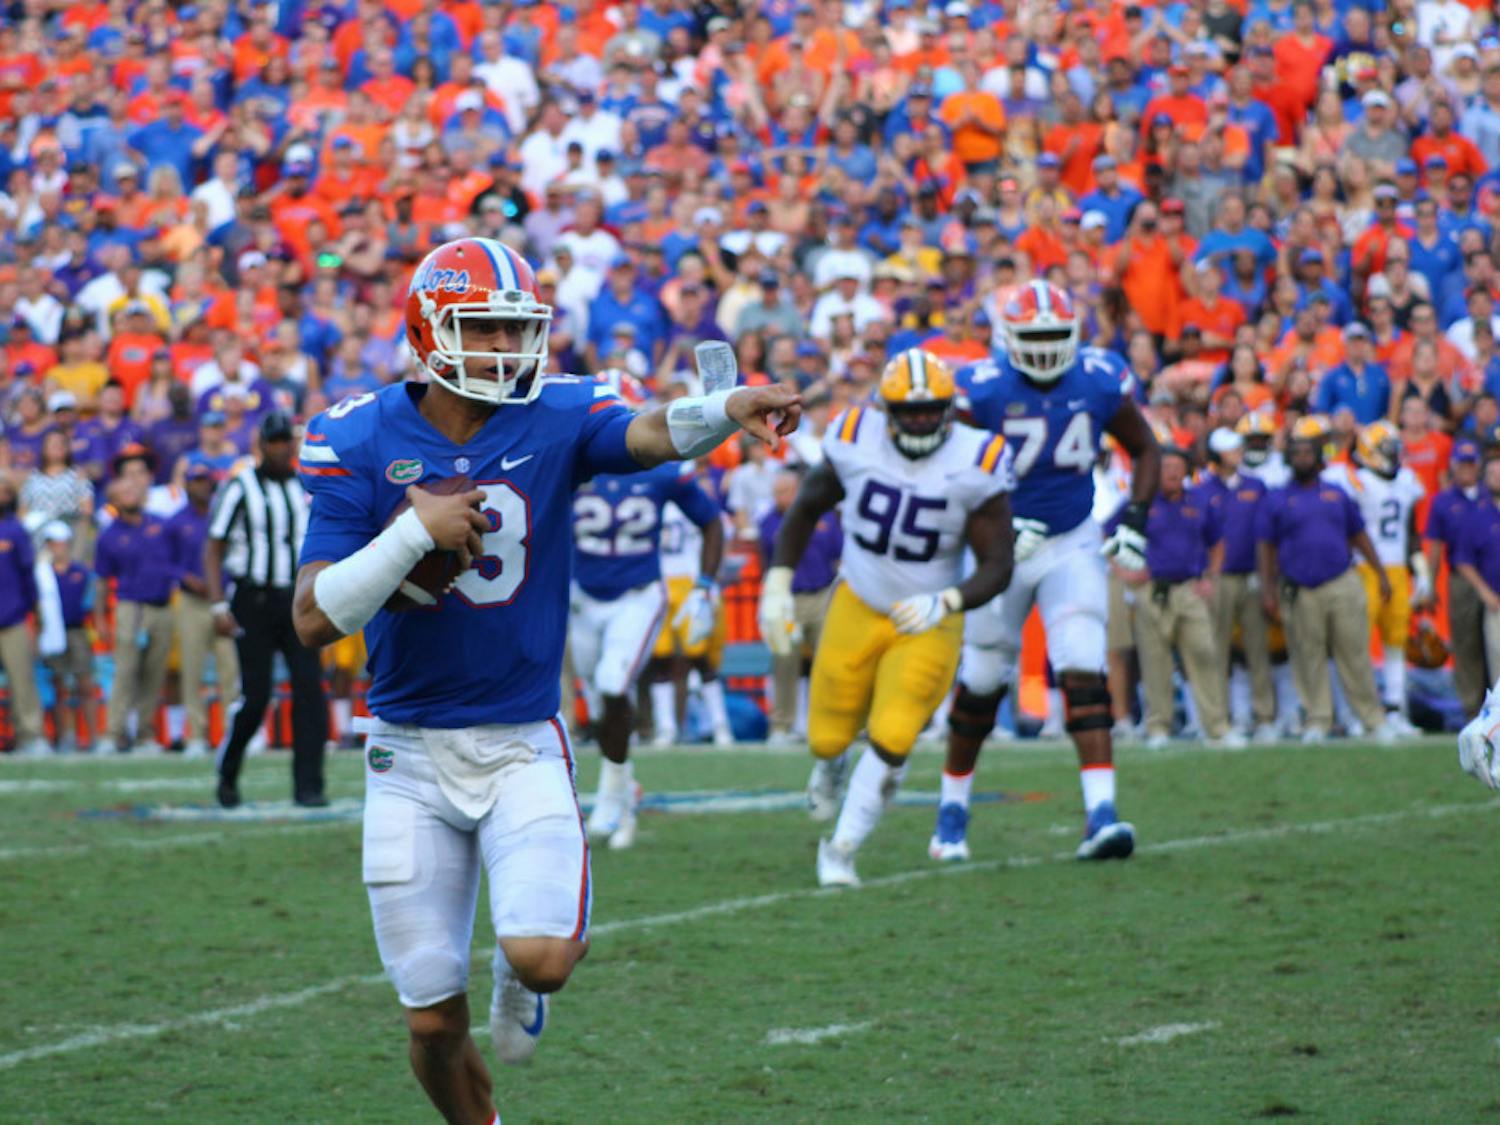 UF quarterback Feleipe Franks calls out for a block while running with the ball during Florida's 17-16 loss to LSU on Saturday at Ben Hill Griffin Stadium.